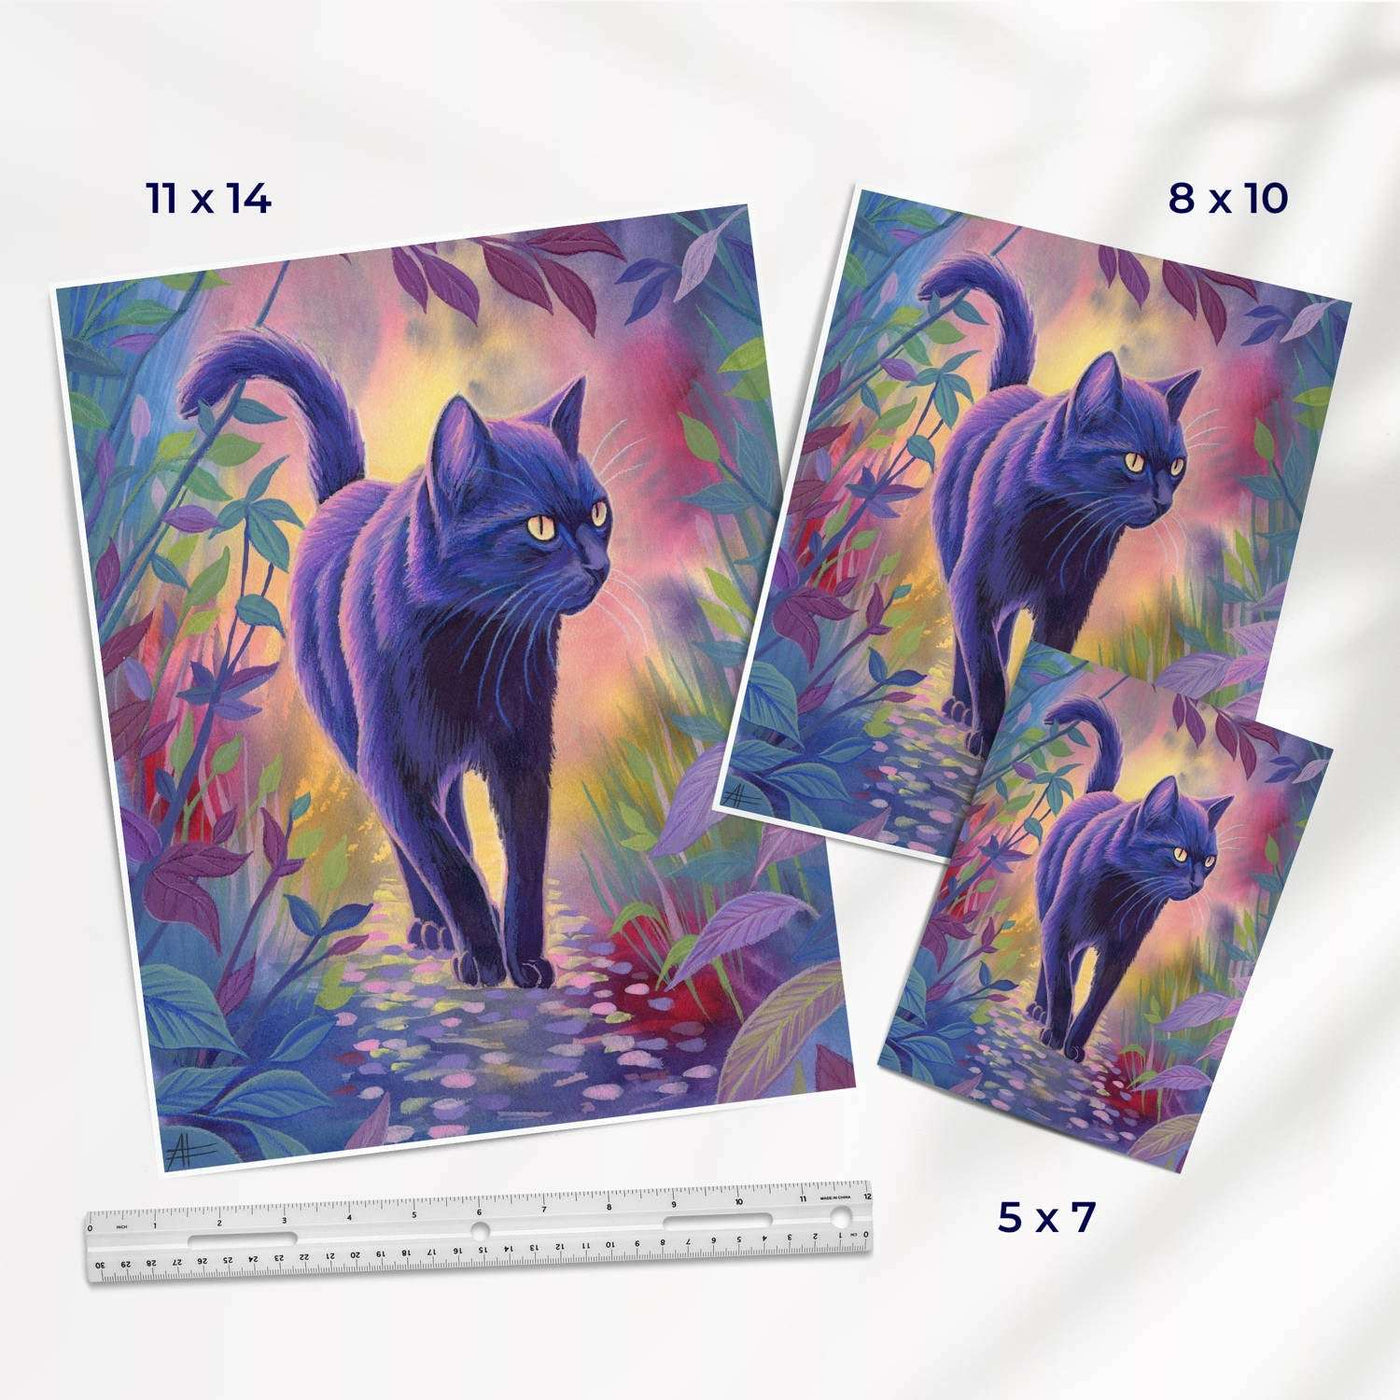 Twilight Watch - Fine Art Print Bundle of a blue cat in a colorful, mystical forest, available in sizes 11x14, 8x10, and 5x7 inches, displayed with a ruler for scale.